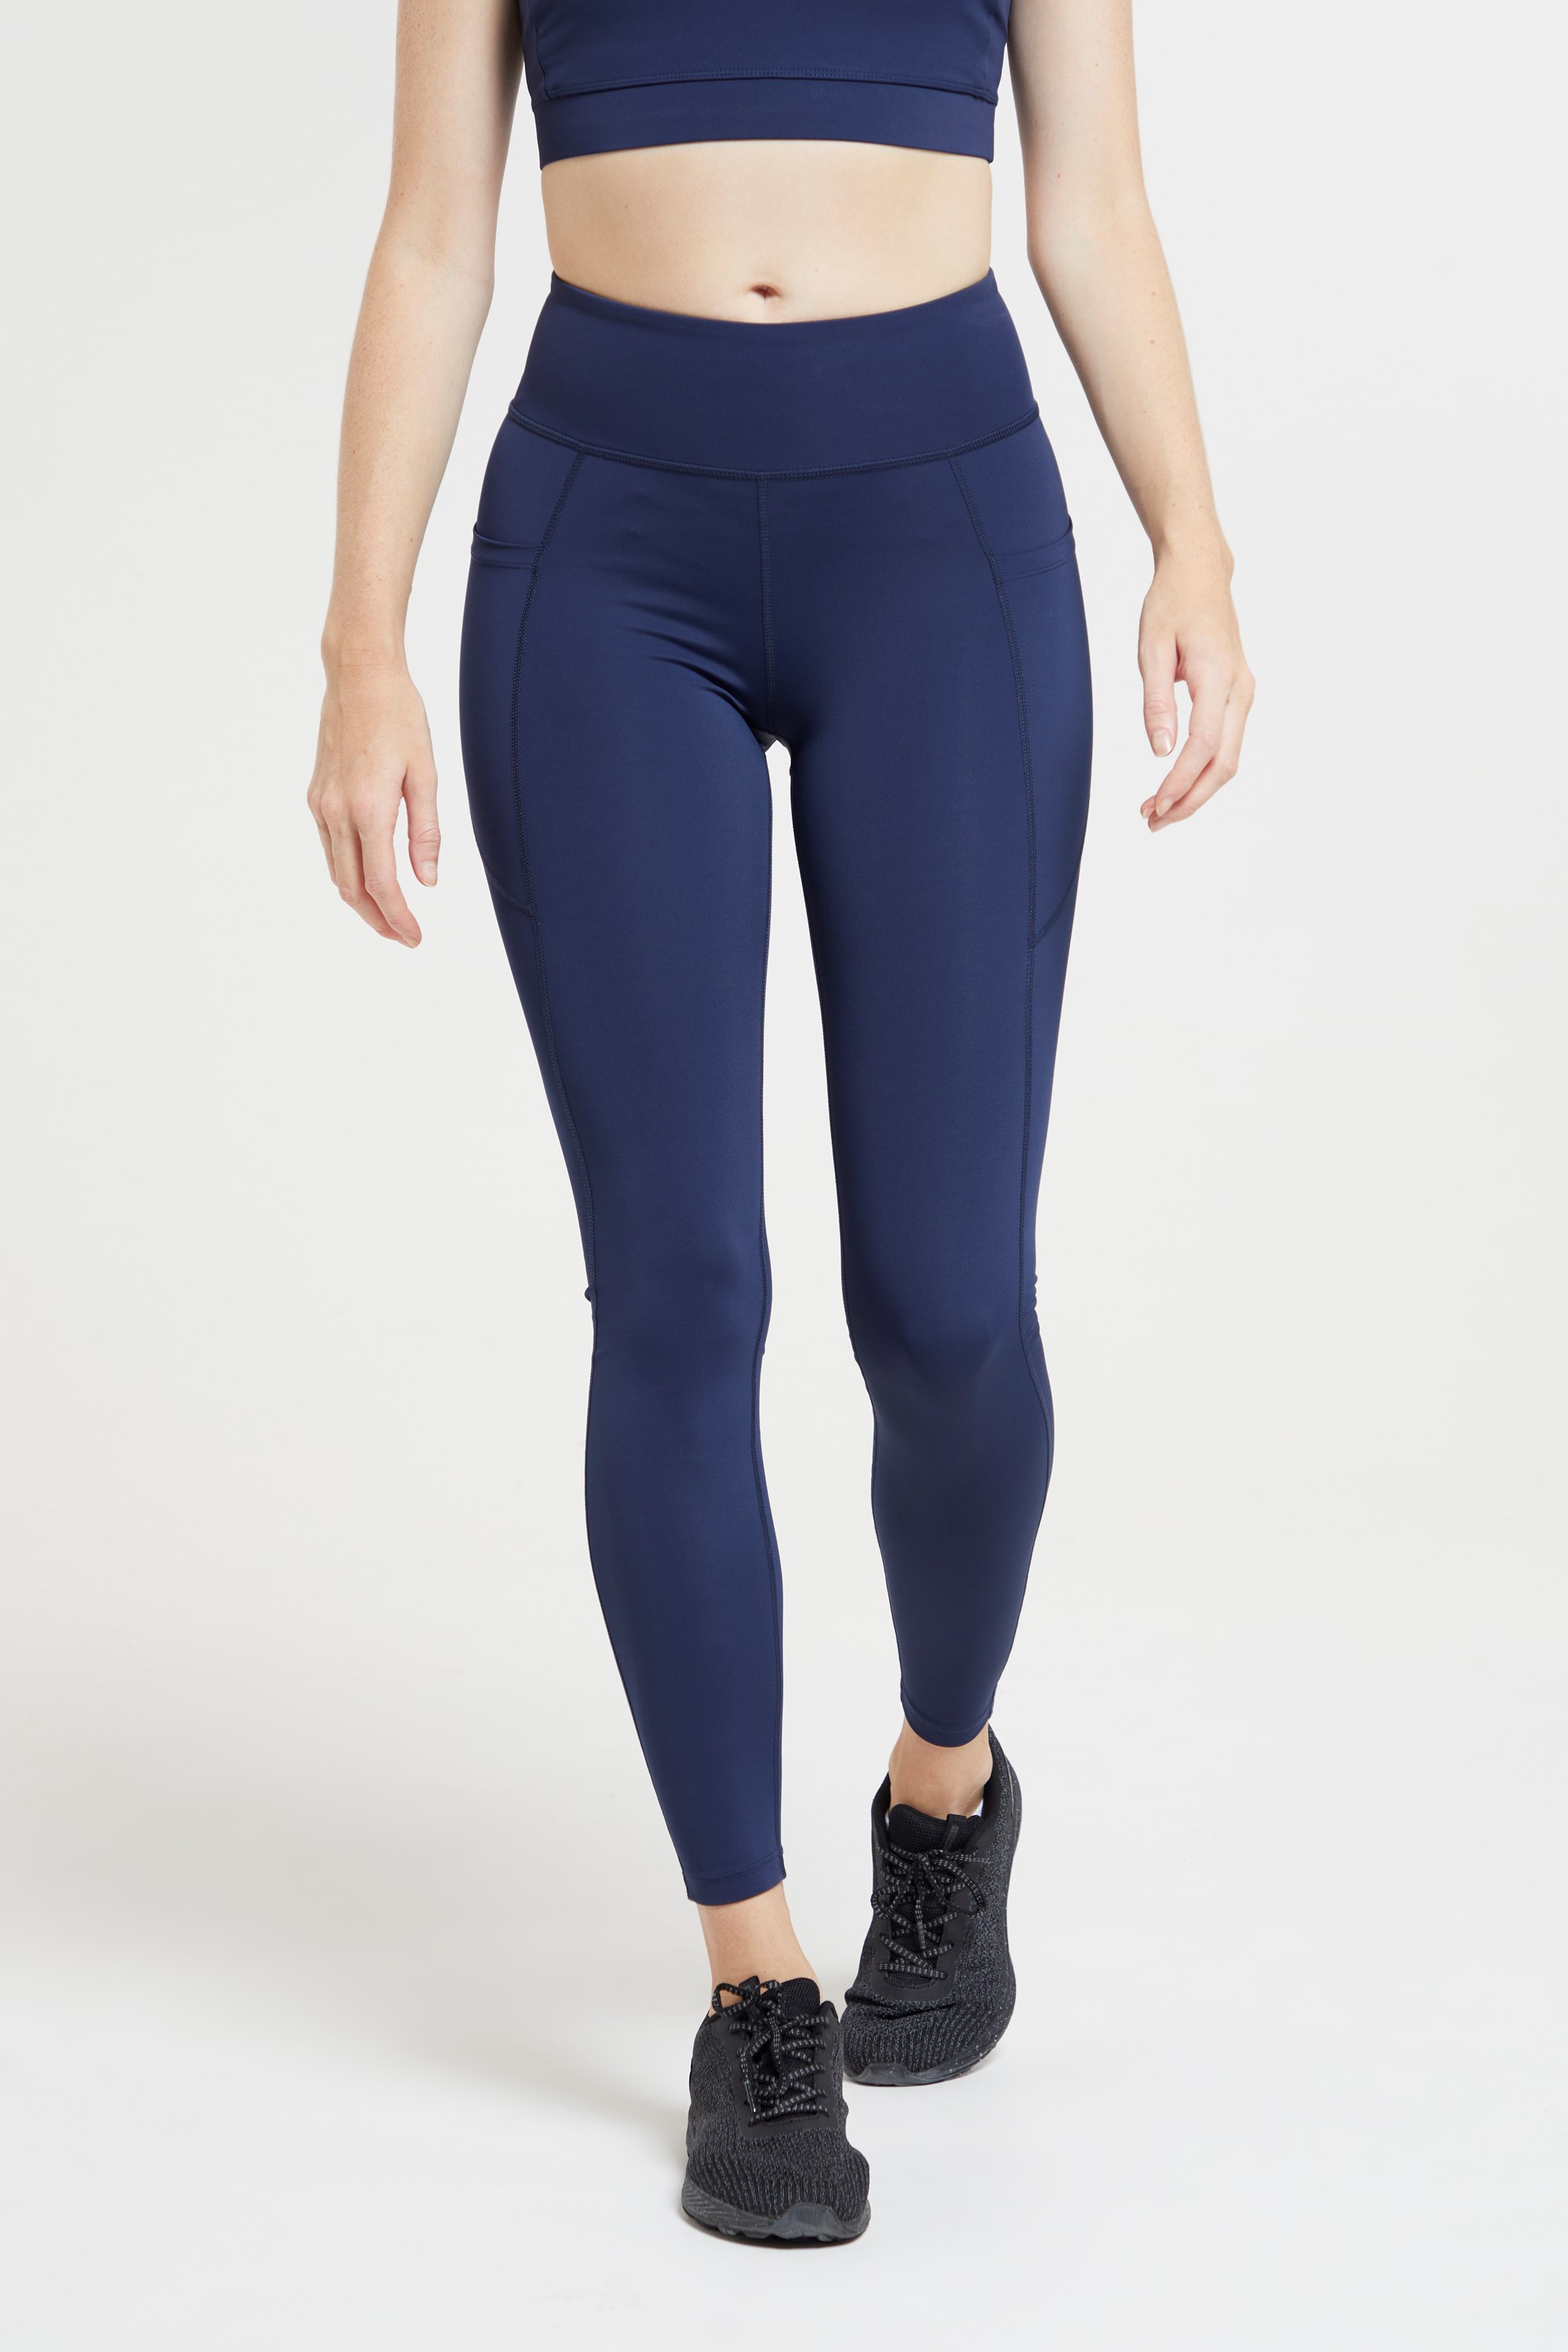 Three great running tights that you can also workout in | Mint Lounge